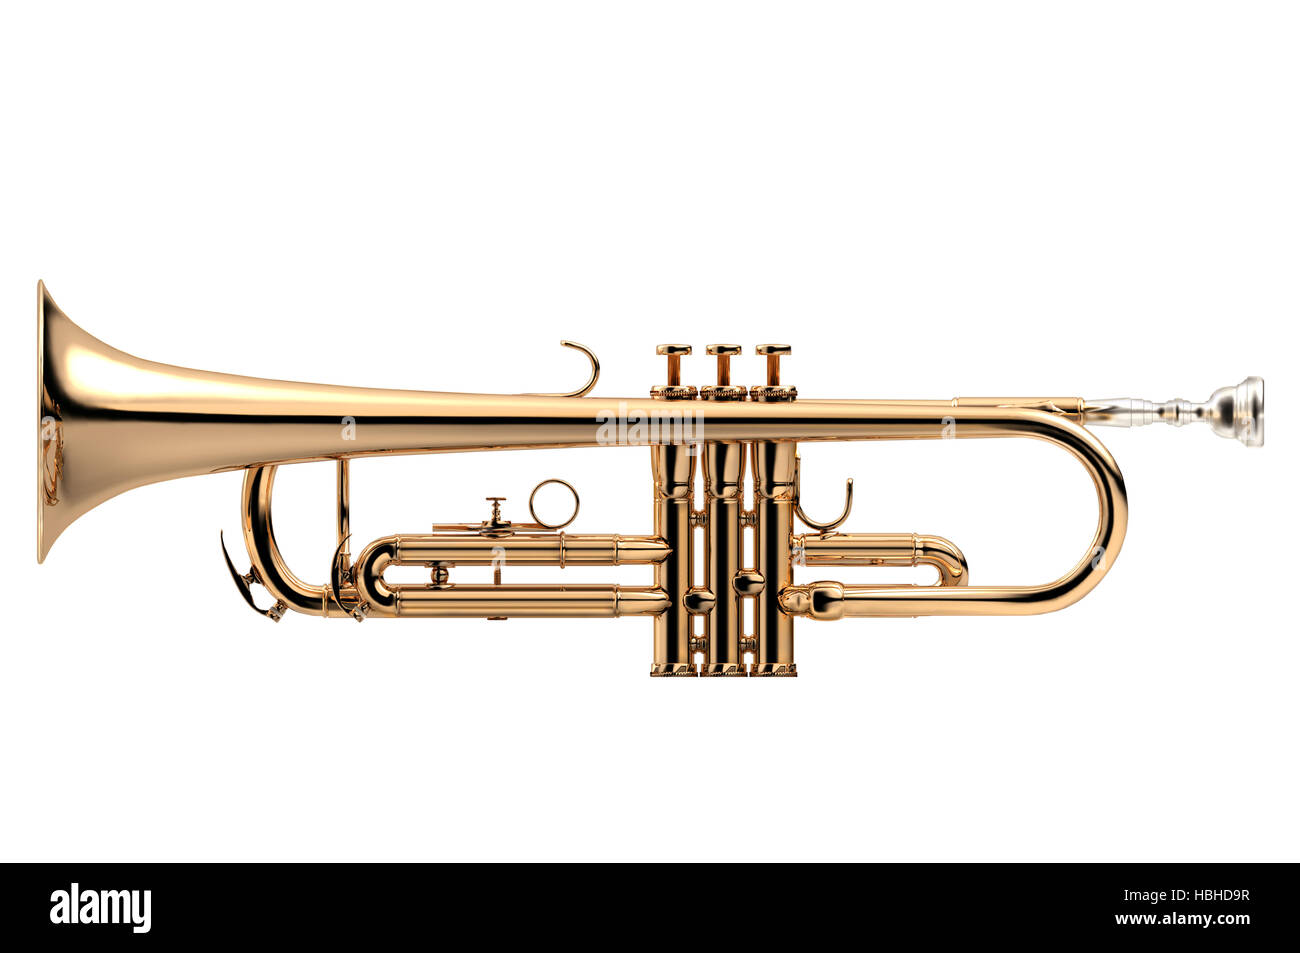 Trumpet - Golden trumpet classical instrument isolated on white, 3D illustration Stock Photo